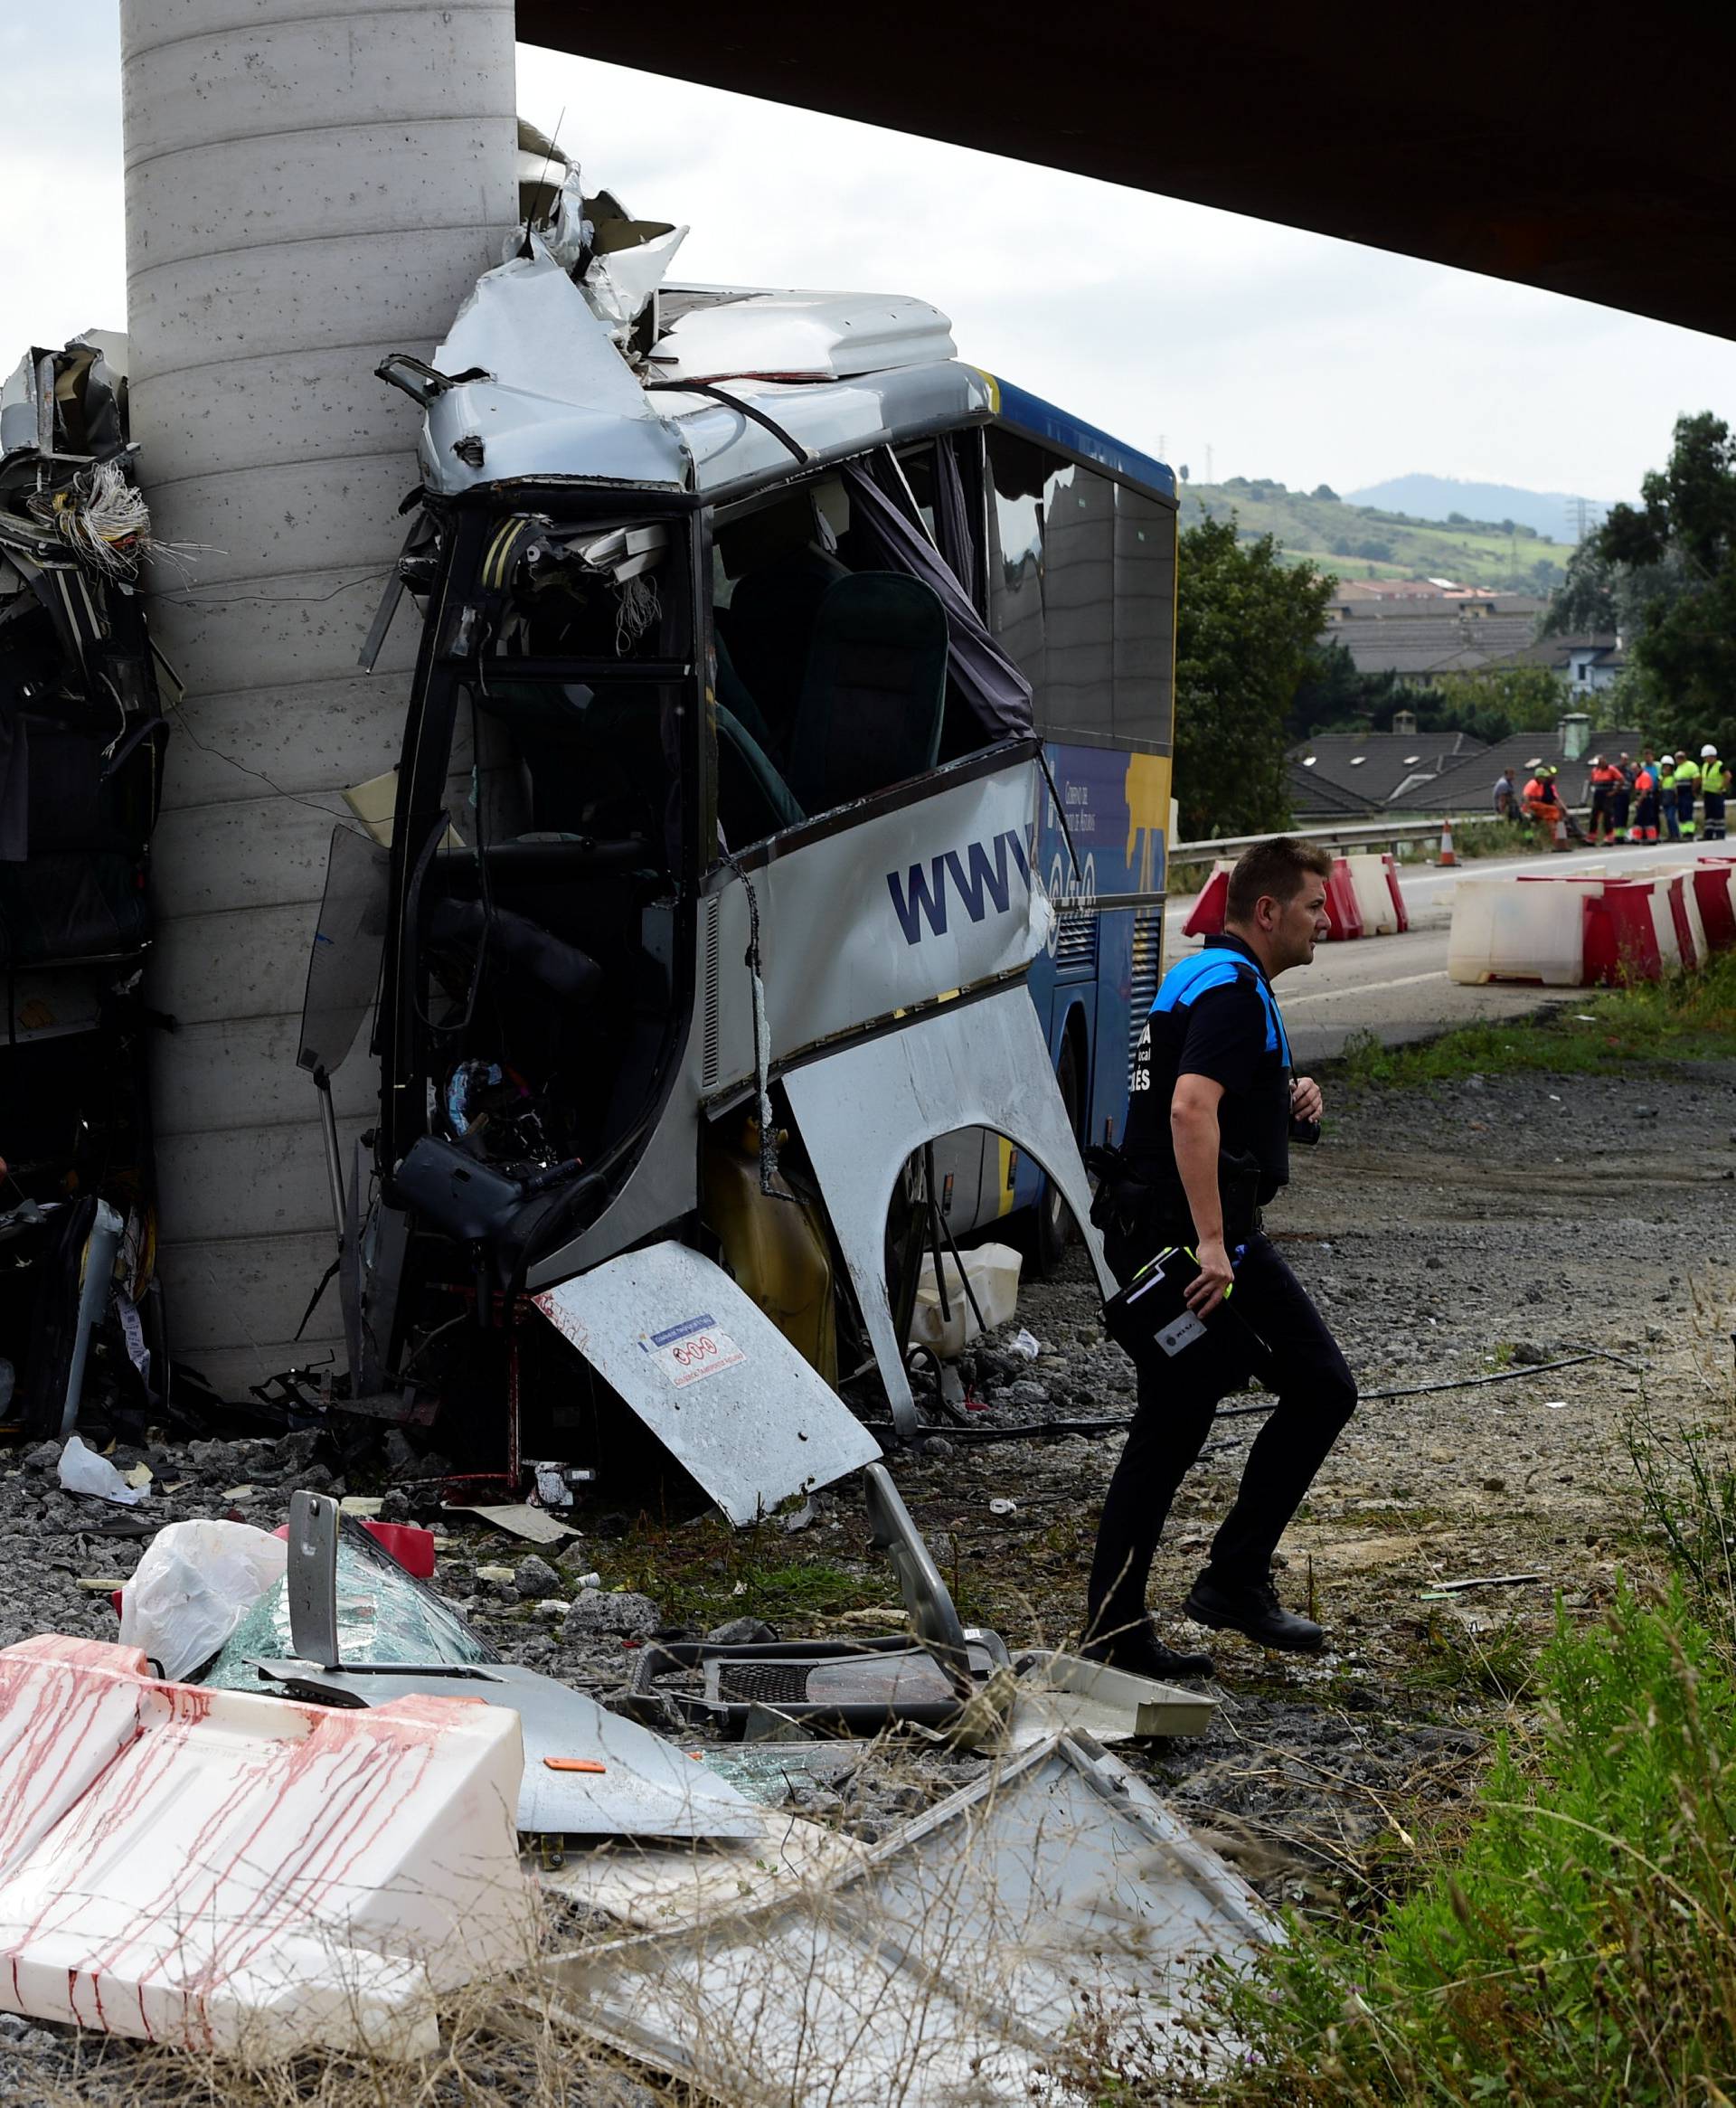 Police investigators survey the wreckage of a bus crash which left at least four people dead in Aviles